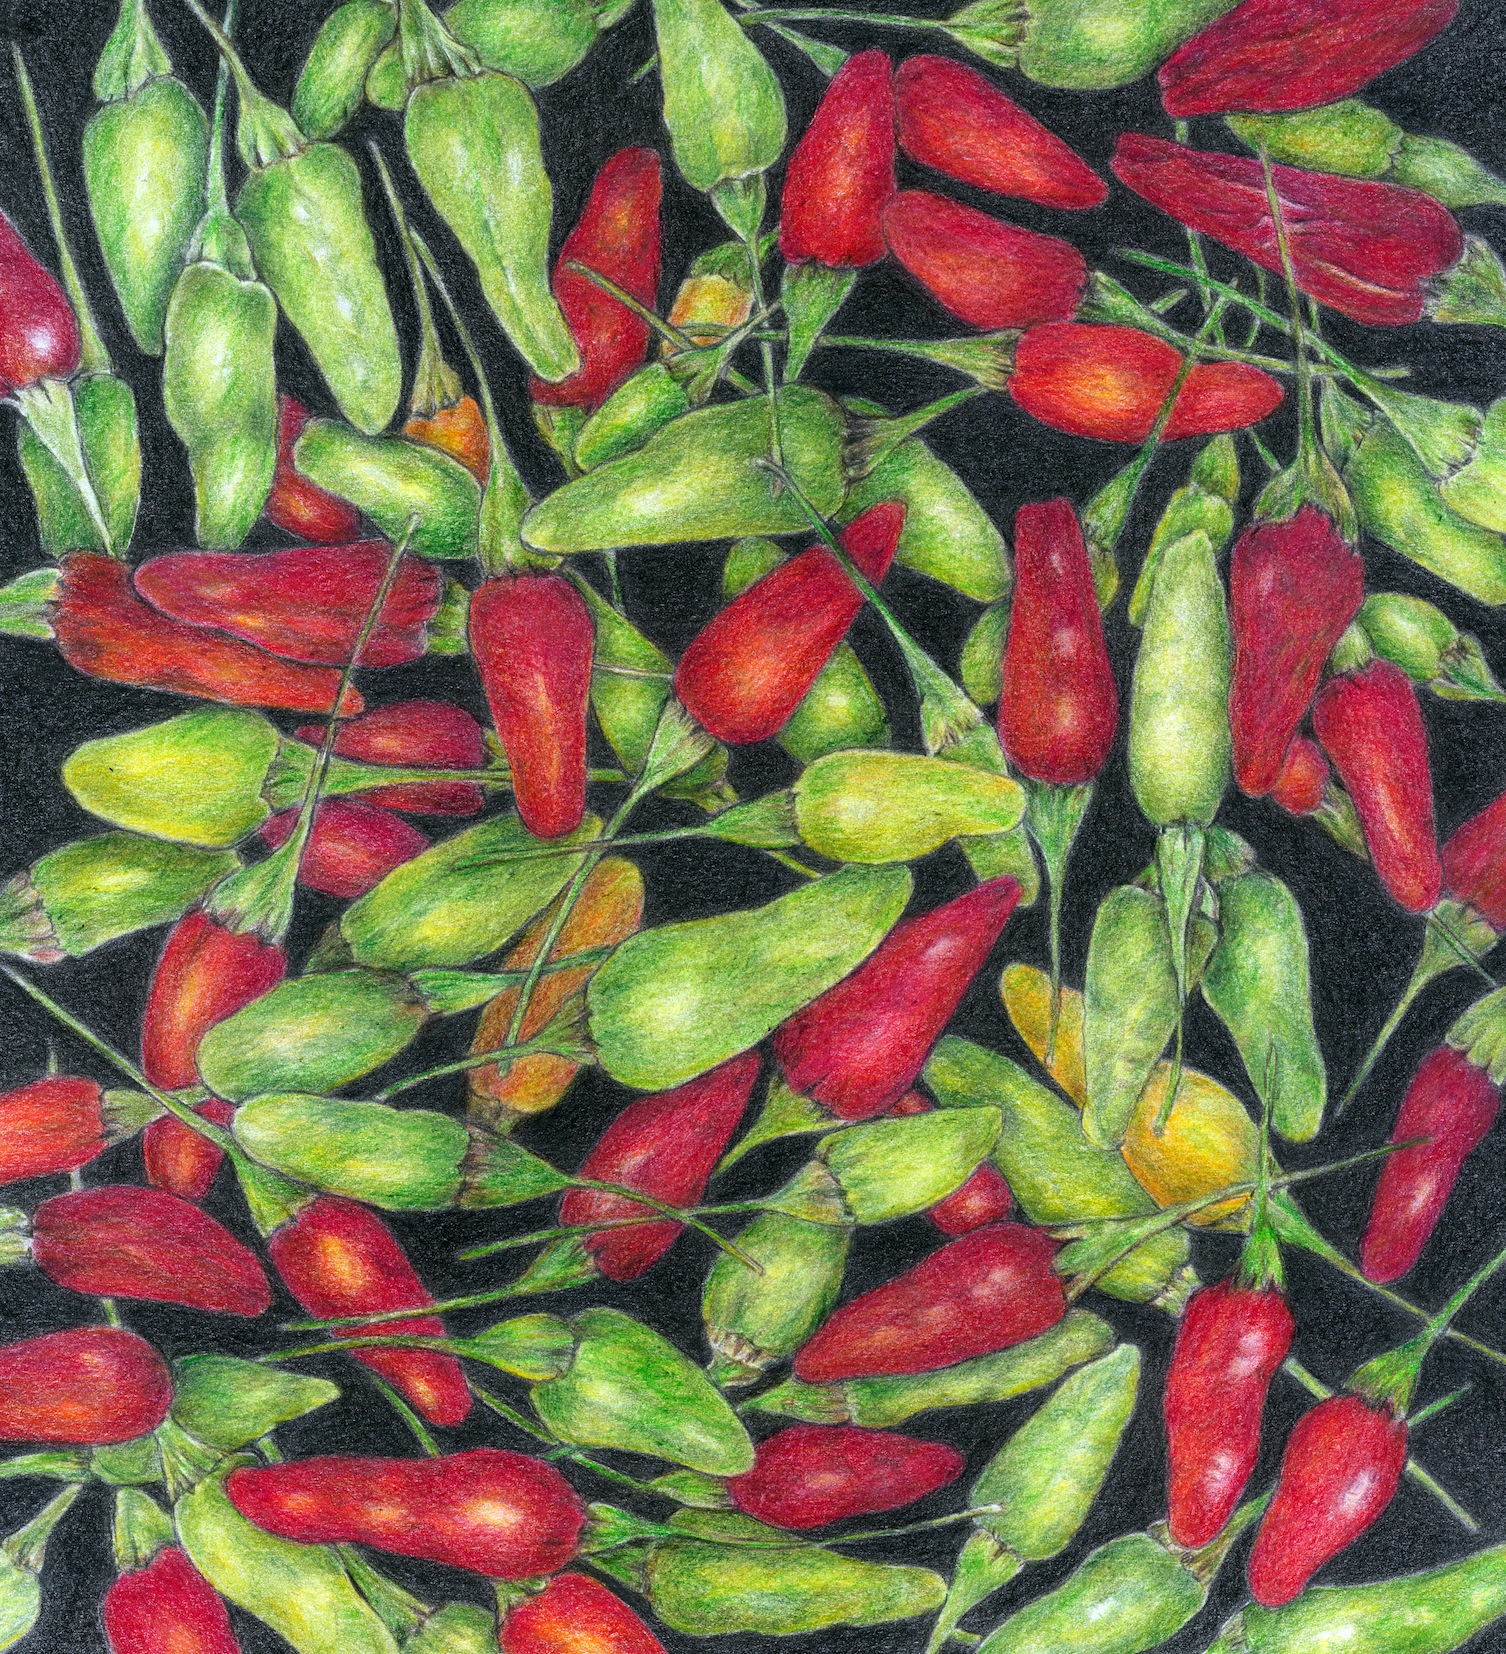 Image of botanical illustration of red and green chillies by Tanya Scharaschkin in her Artist Profile with Art Trails Tasmania